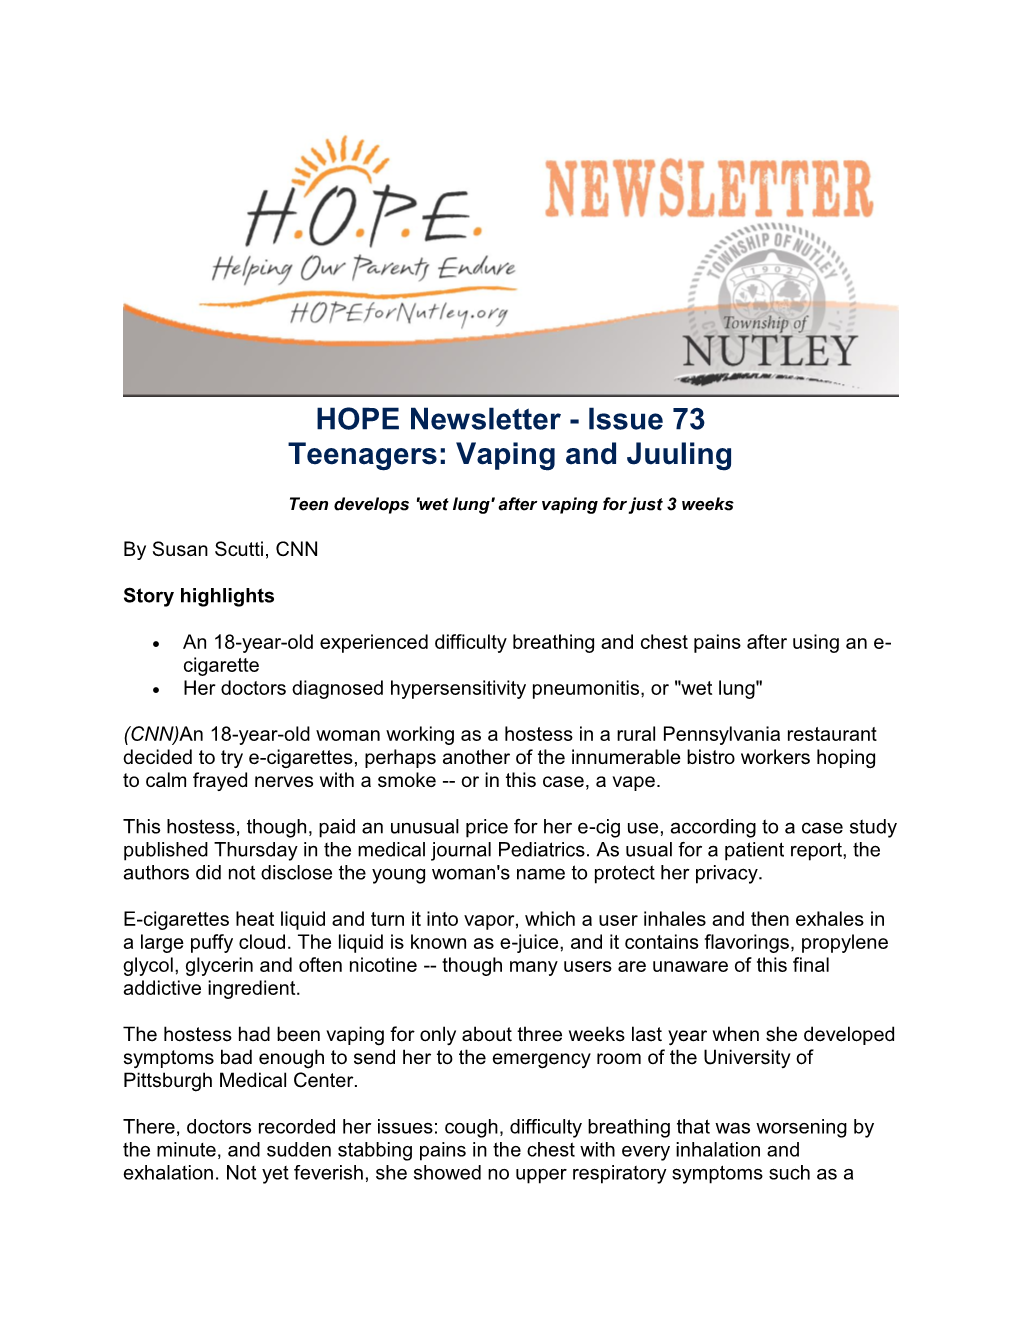 HOPE Newsletter - Issue 73 Teenagers: Vaping and Juuling